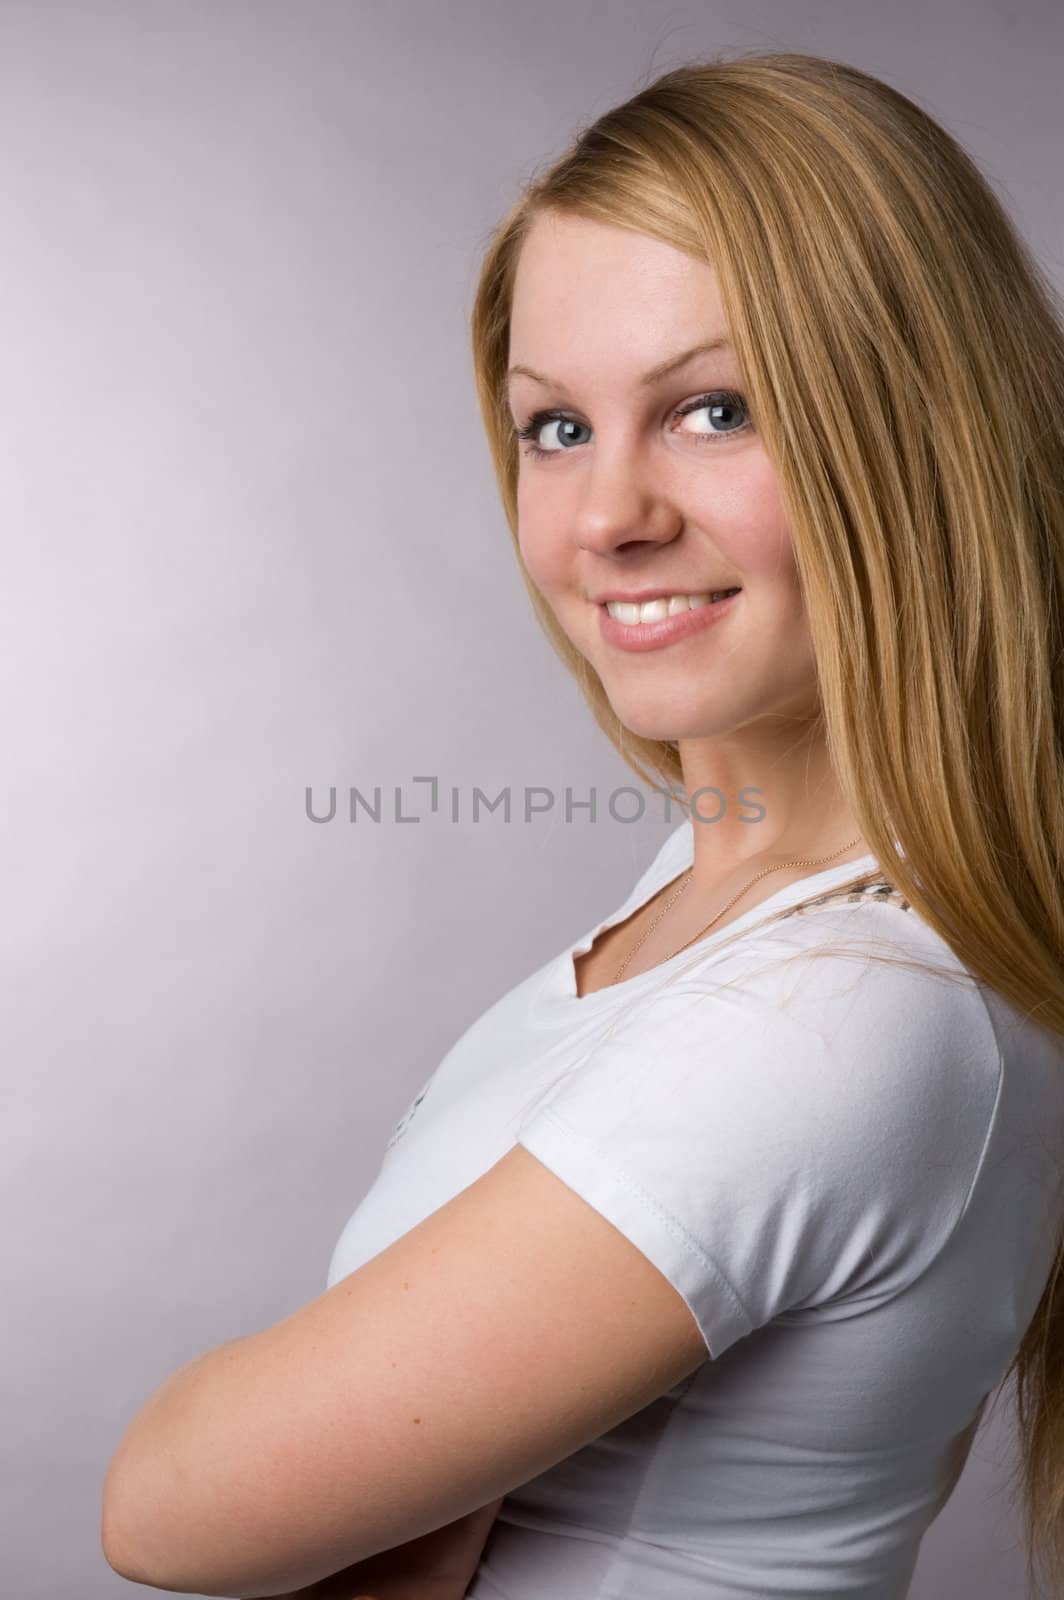 A smiling blonde on a grey background in studio. by andyphoto